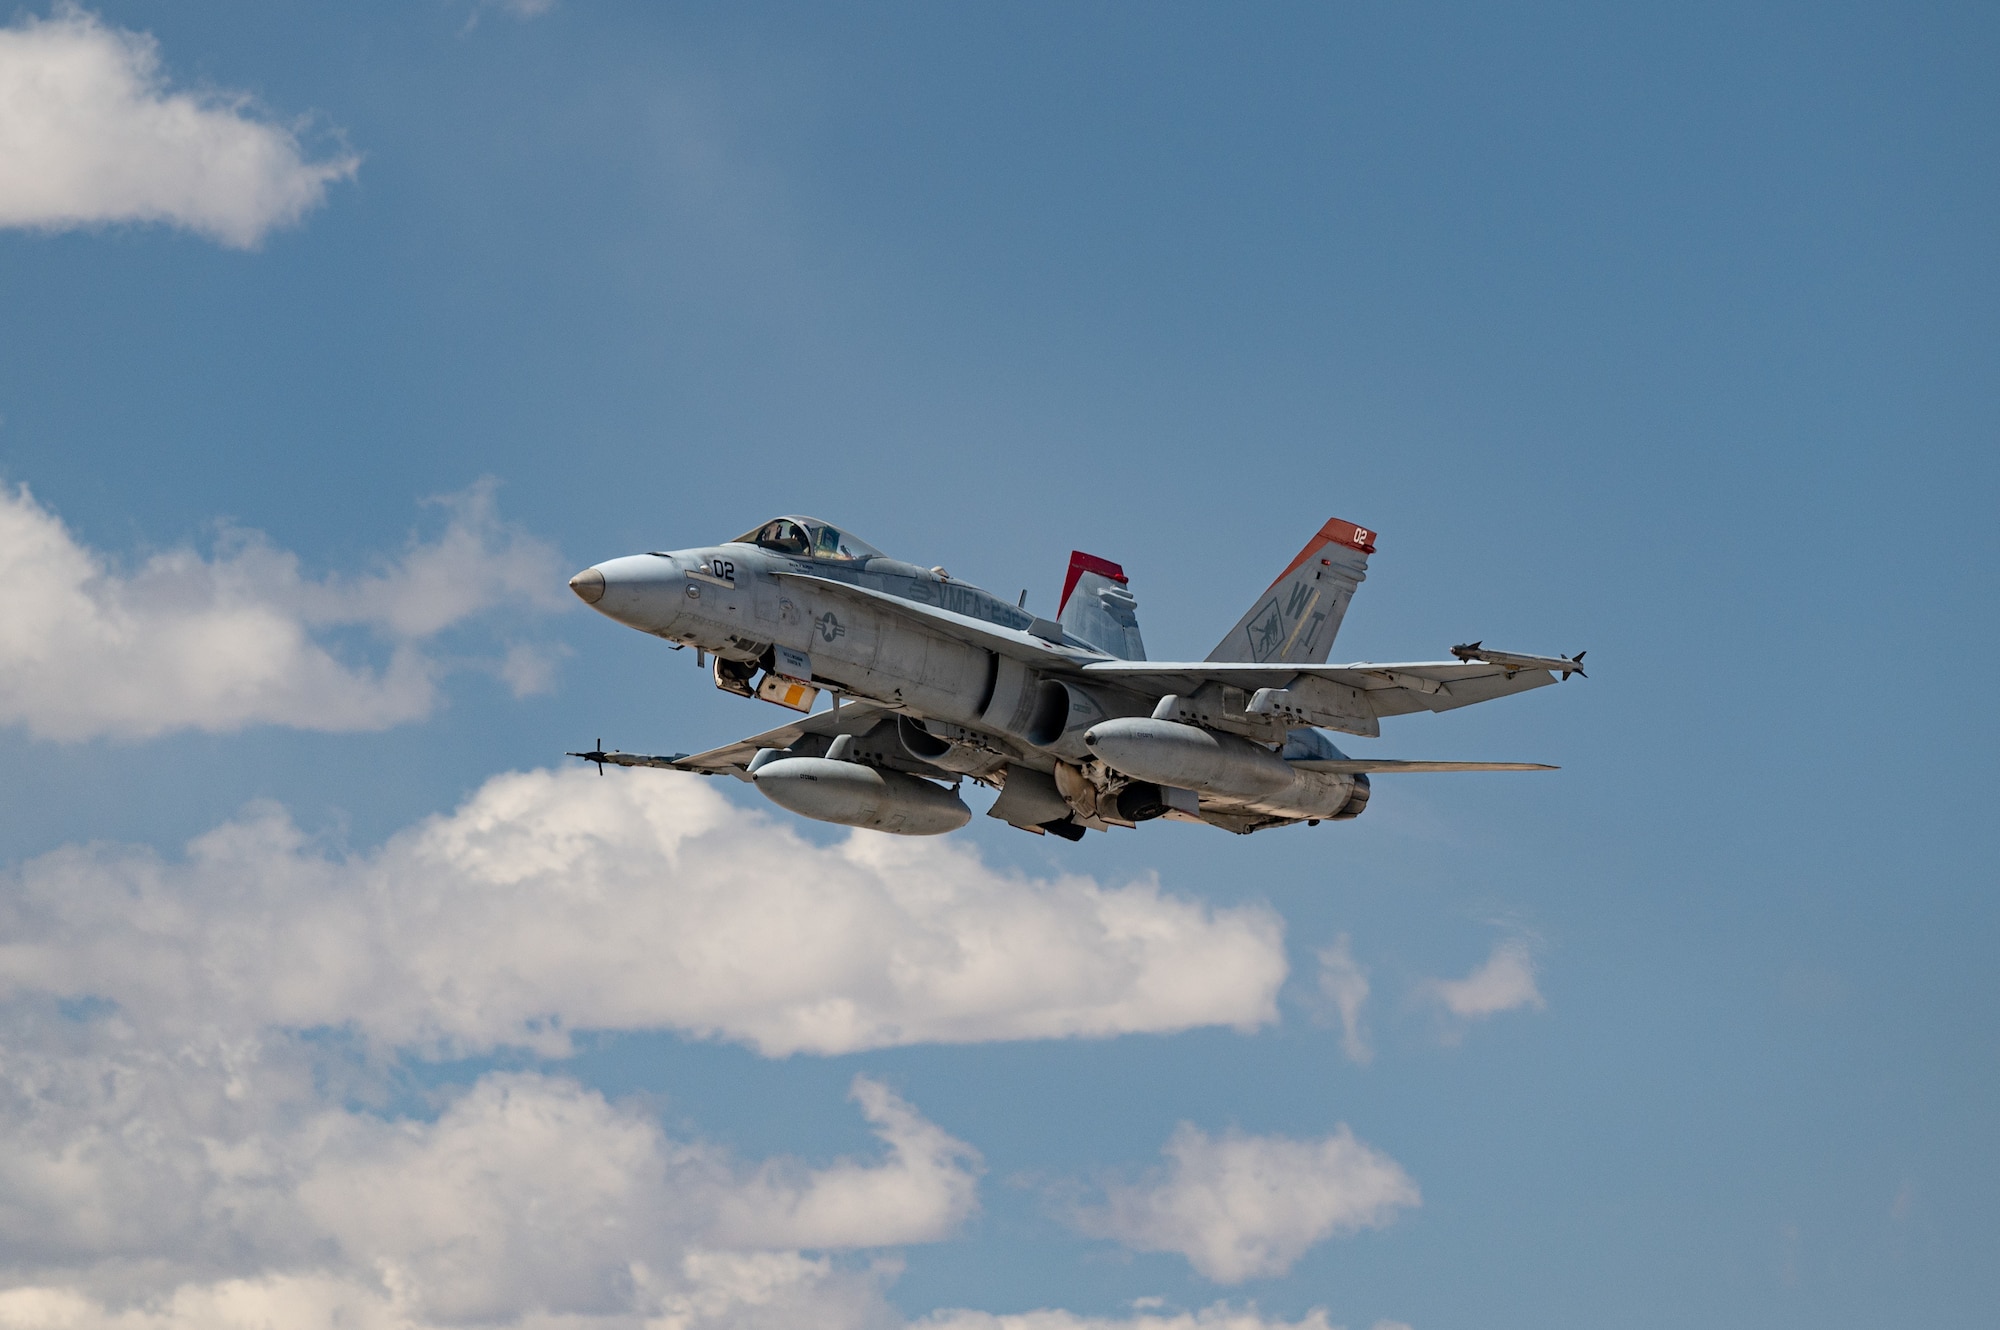 An F/A-18D Hornet assigned to the Marine All Weather Fighter Attack Squadron 533 takes off in participation of Black Flag 22-1, Nellis Air Force Base, Nevada, May 11, 2022. Black Flag identifies enhancements to U.S. and Coalition night one capabilities against our pacing competitiors. (U.S. Air Force photo by Airman Trevor Bell)